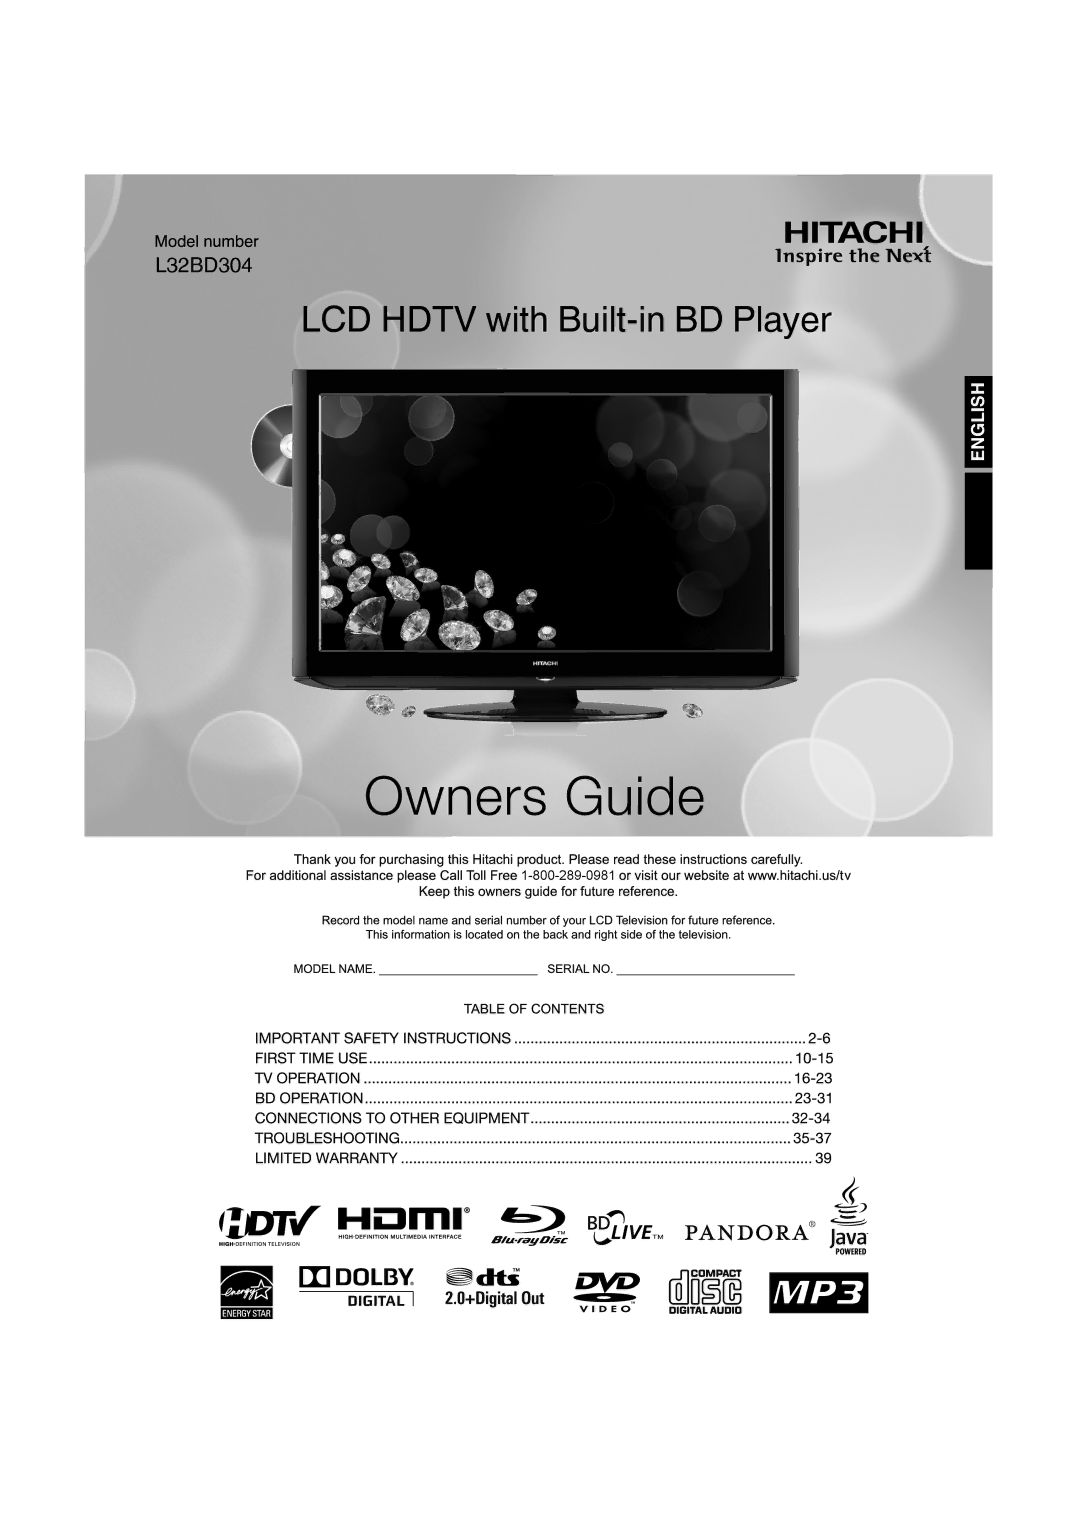 Hitachi L32BD304 manual LCD Hdtv with Built-in BD Player 